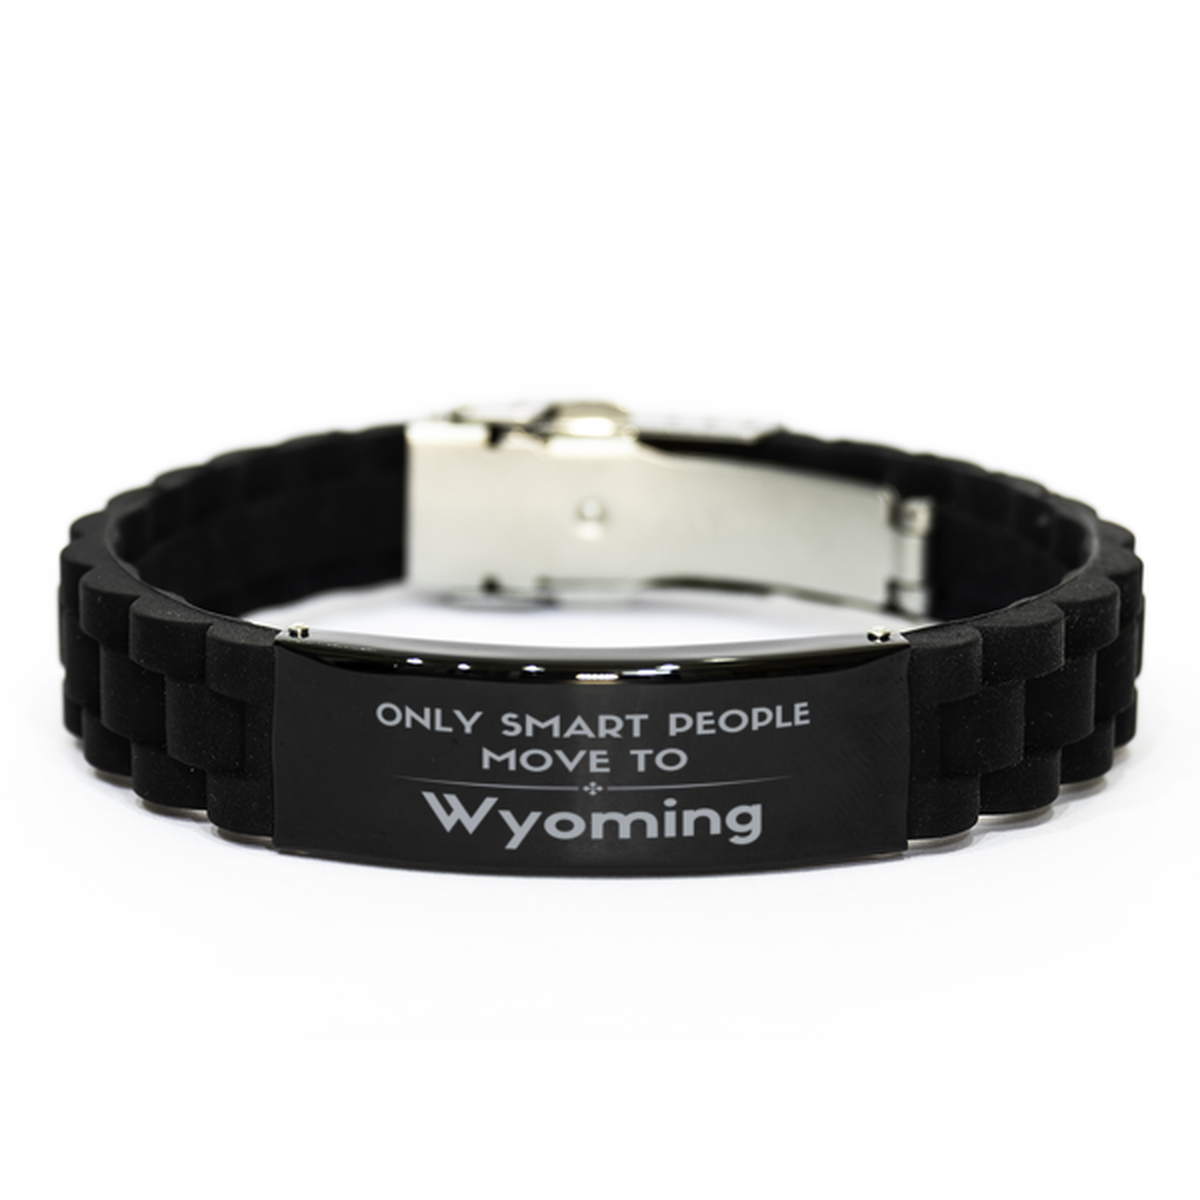 Only smart people move to Wyoming Black Glidelock Clasp Bracelet, Gag Gifts For Wyoming, Move to Wyoming Gifts for Friends Coworker Funny Saying Quote